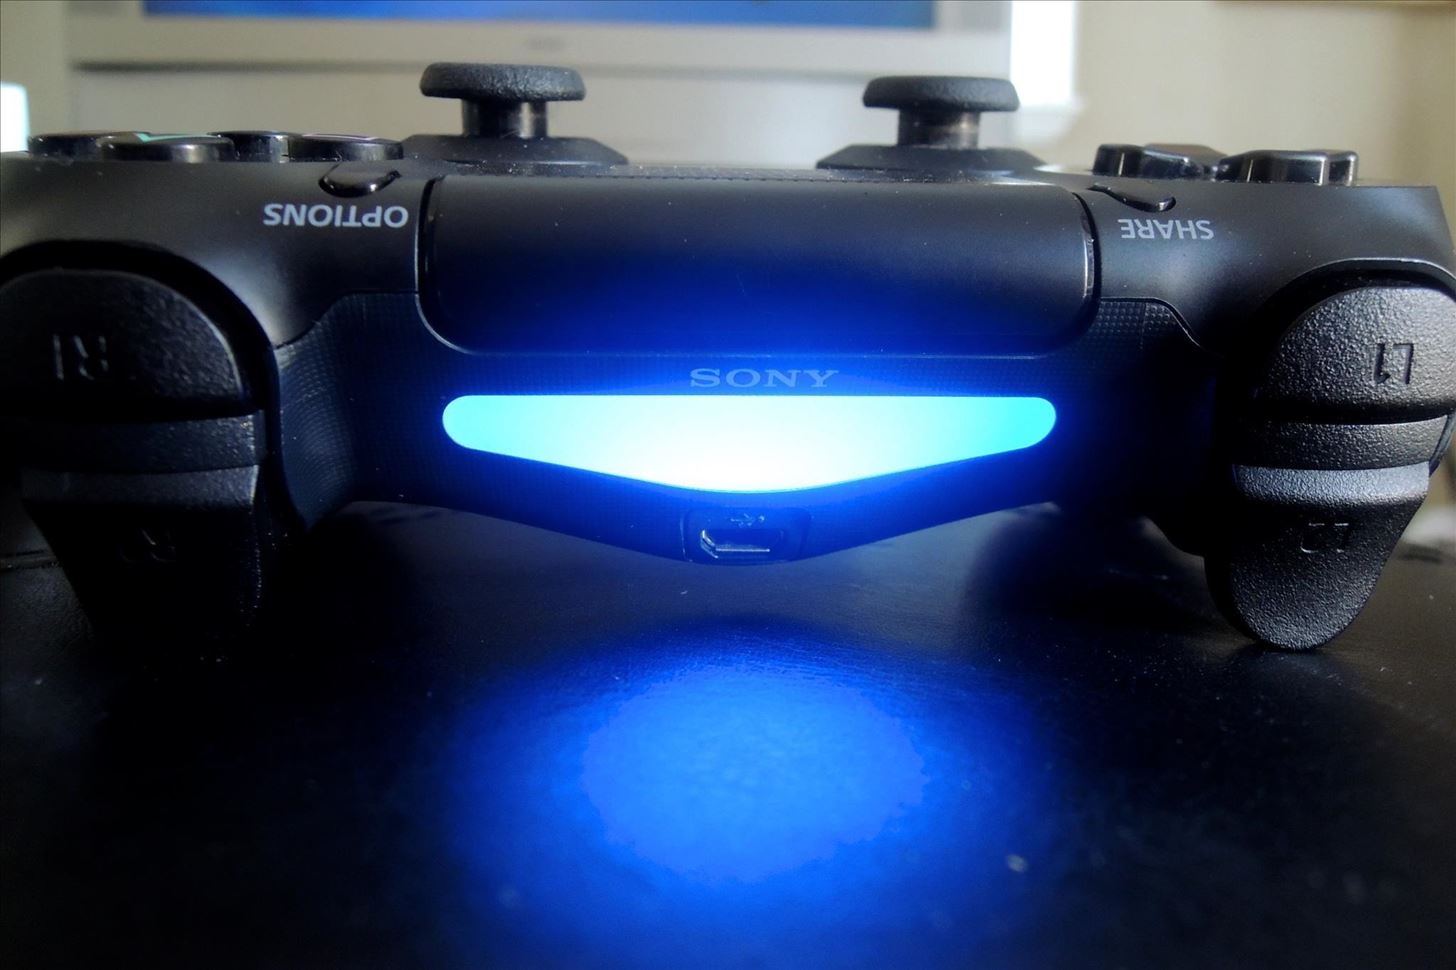 How to Dim the Light on Your PS4's DualShock Controller